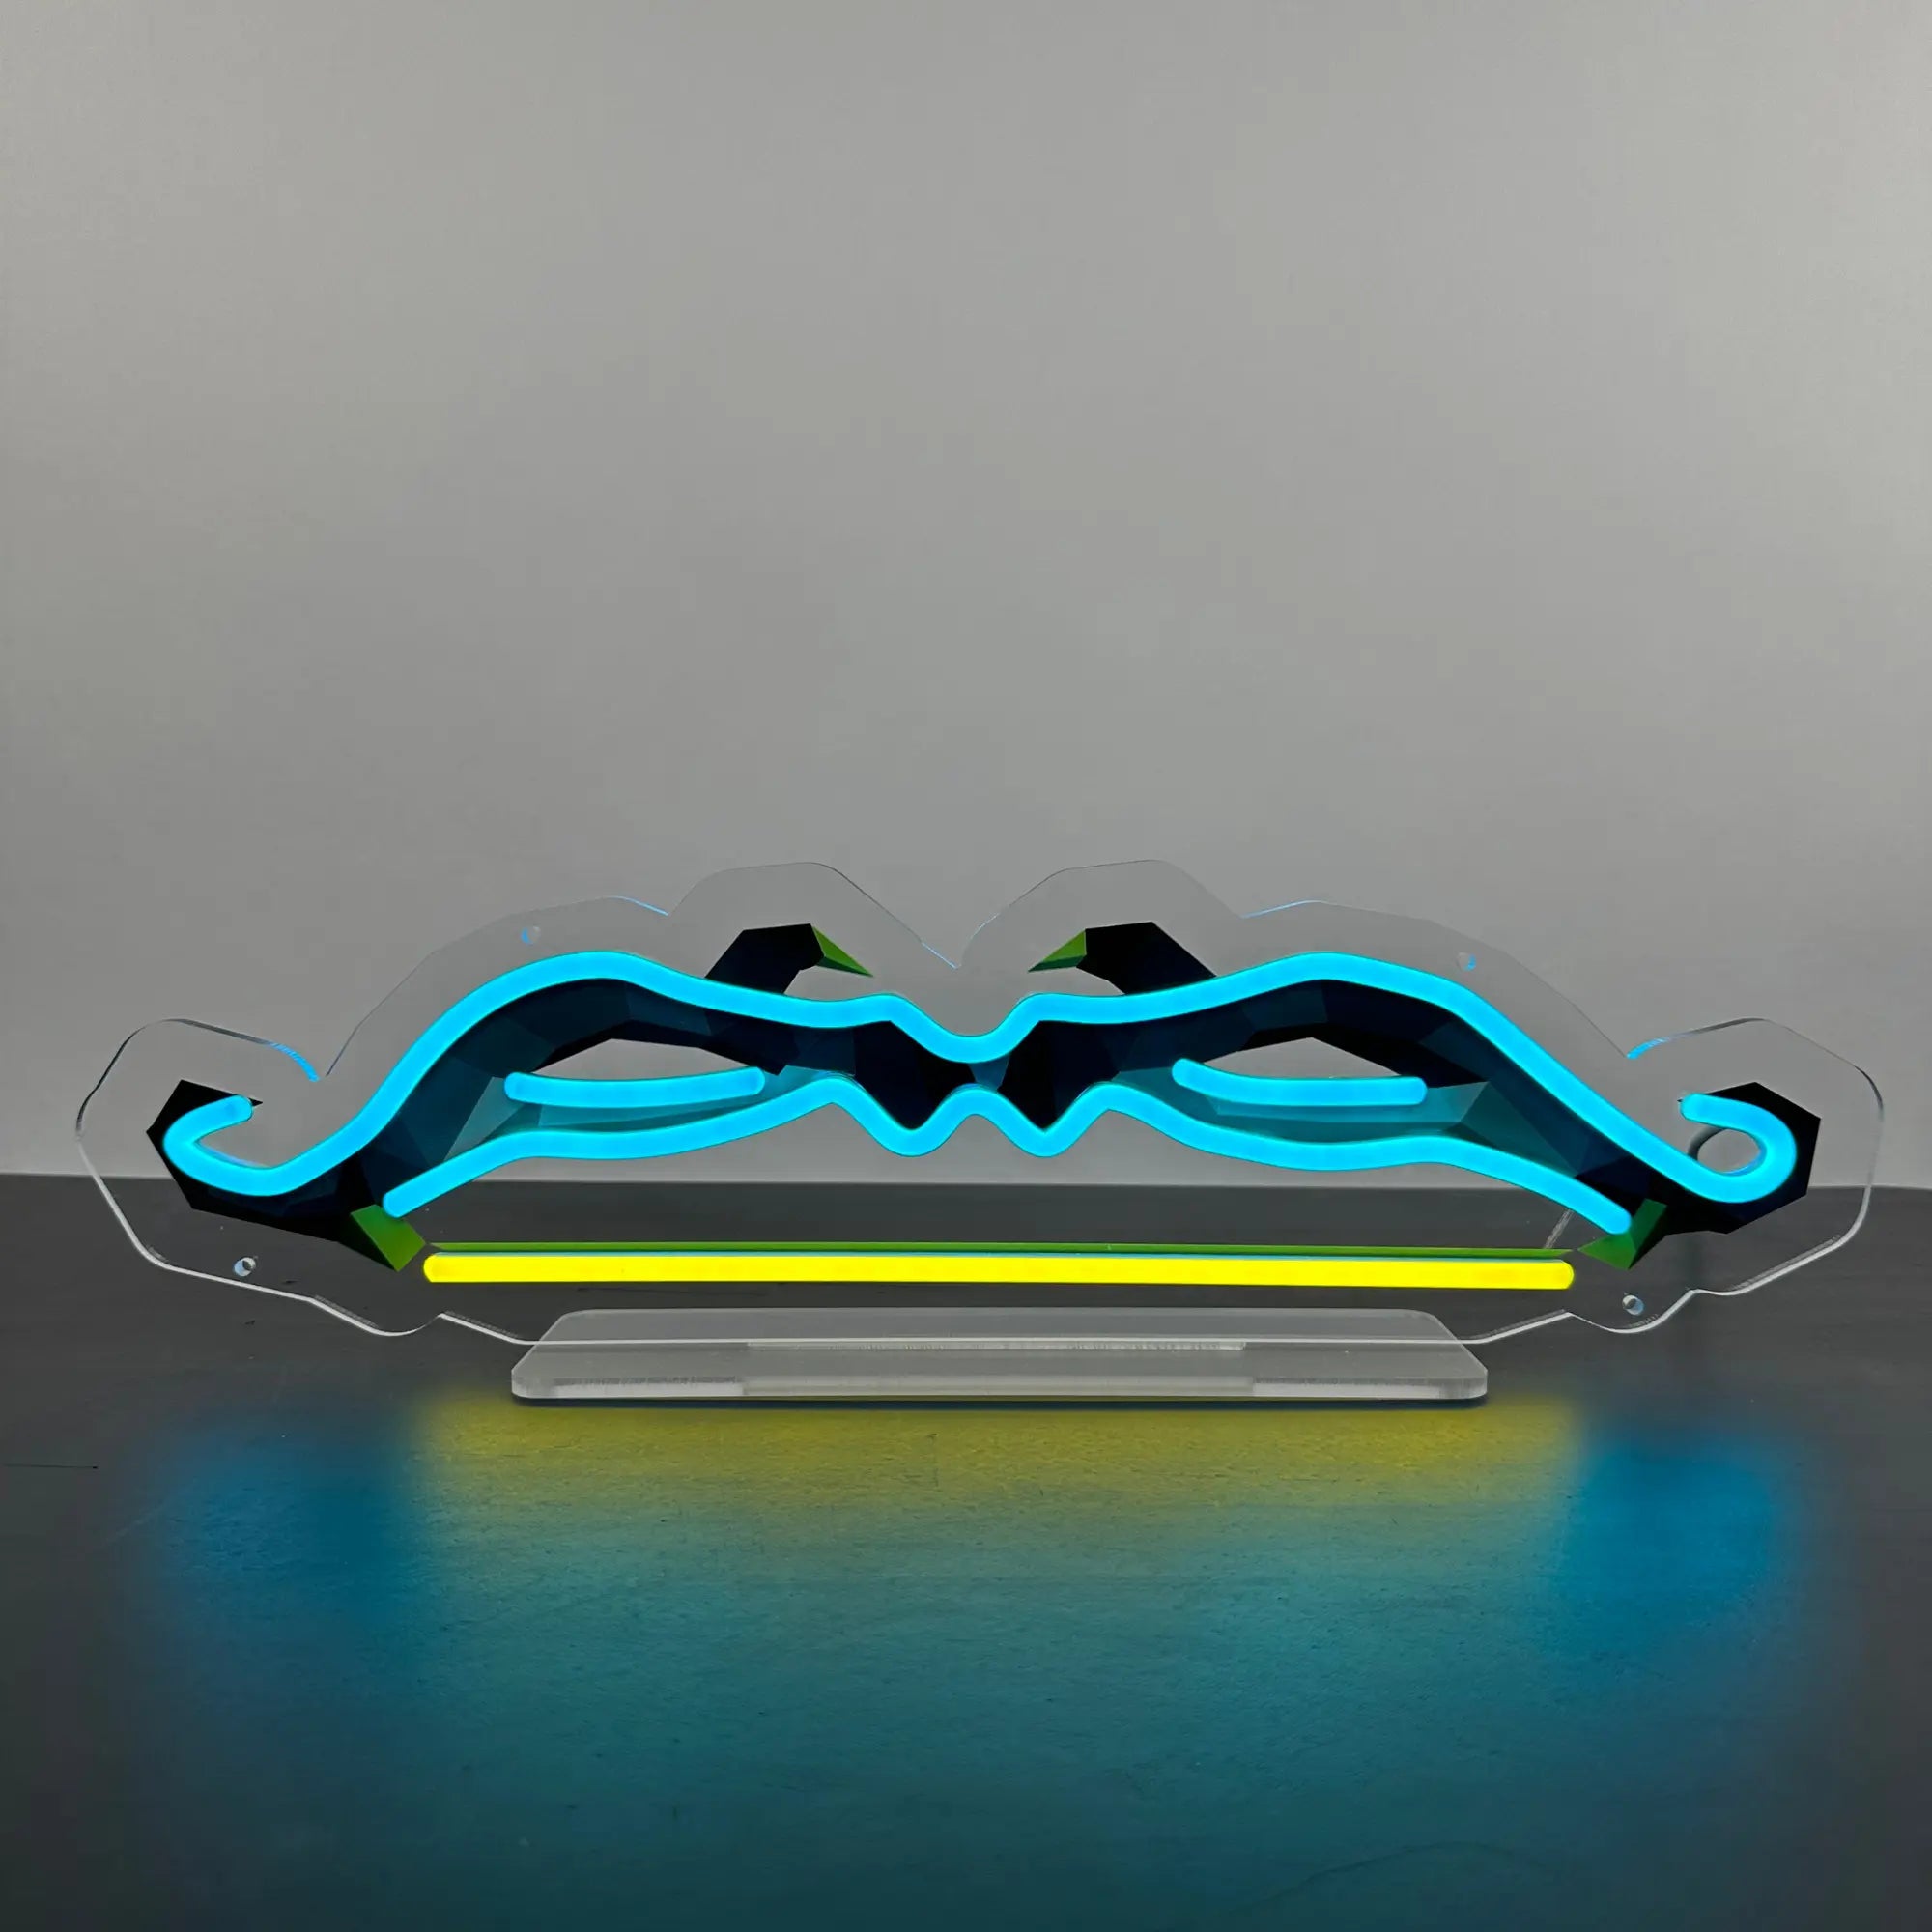 A close-up of a Twisted Bow LED neon sign illuminated on a table, showcasing its intricate design and vibrant colors, evoking nostalgia for Runescape fans.